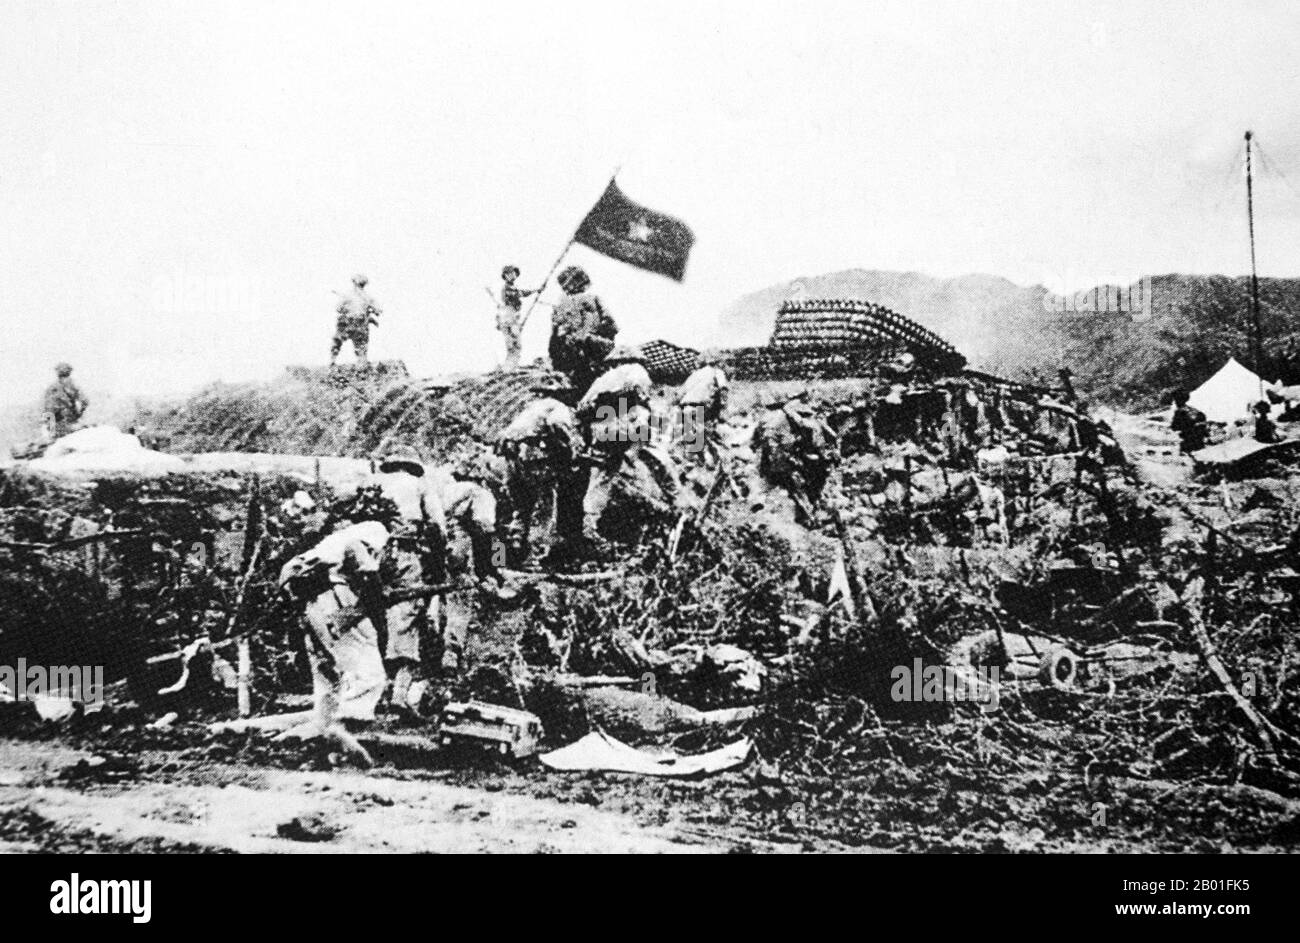 Vietnam: Victorious Viet Minh troops wave a Vietnamese flag over captured French command post at Dien Bien Phu, May 7, 1954.  The important Battle of Dien Bien Phu was fought between the Việt Minh (led by General Vo Nguyen Giap), and the French Union (led by General Henri Navarre, successor to General Raoul Salan). The siege of the French garrison lasted fifty-seven days, from 5:30 PM on March 13 to 5:30 PM on May 7, 1954.  The southern outpost or fire base of the camp, Isabelle, did not follow the cease-fire order and fought until the next day at 01:00 AM. Stock Photo